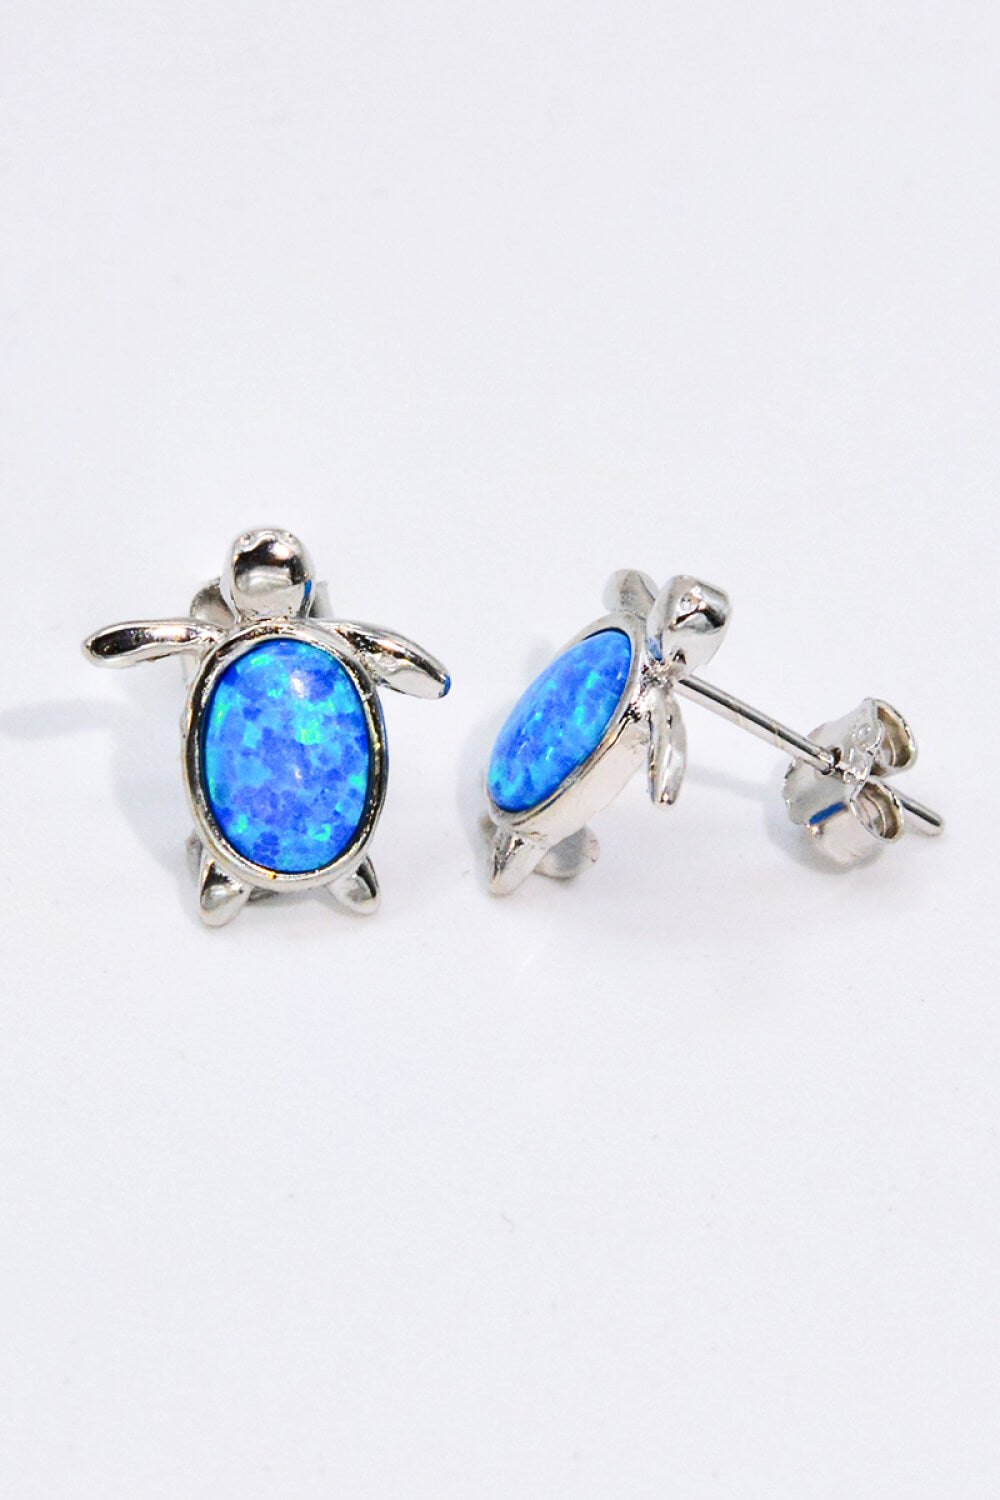 Opal Turtle Stud Earrings-Earrings-Inspired by Justeen-Women's Clothing Boutique in Chicago, Illinois